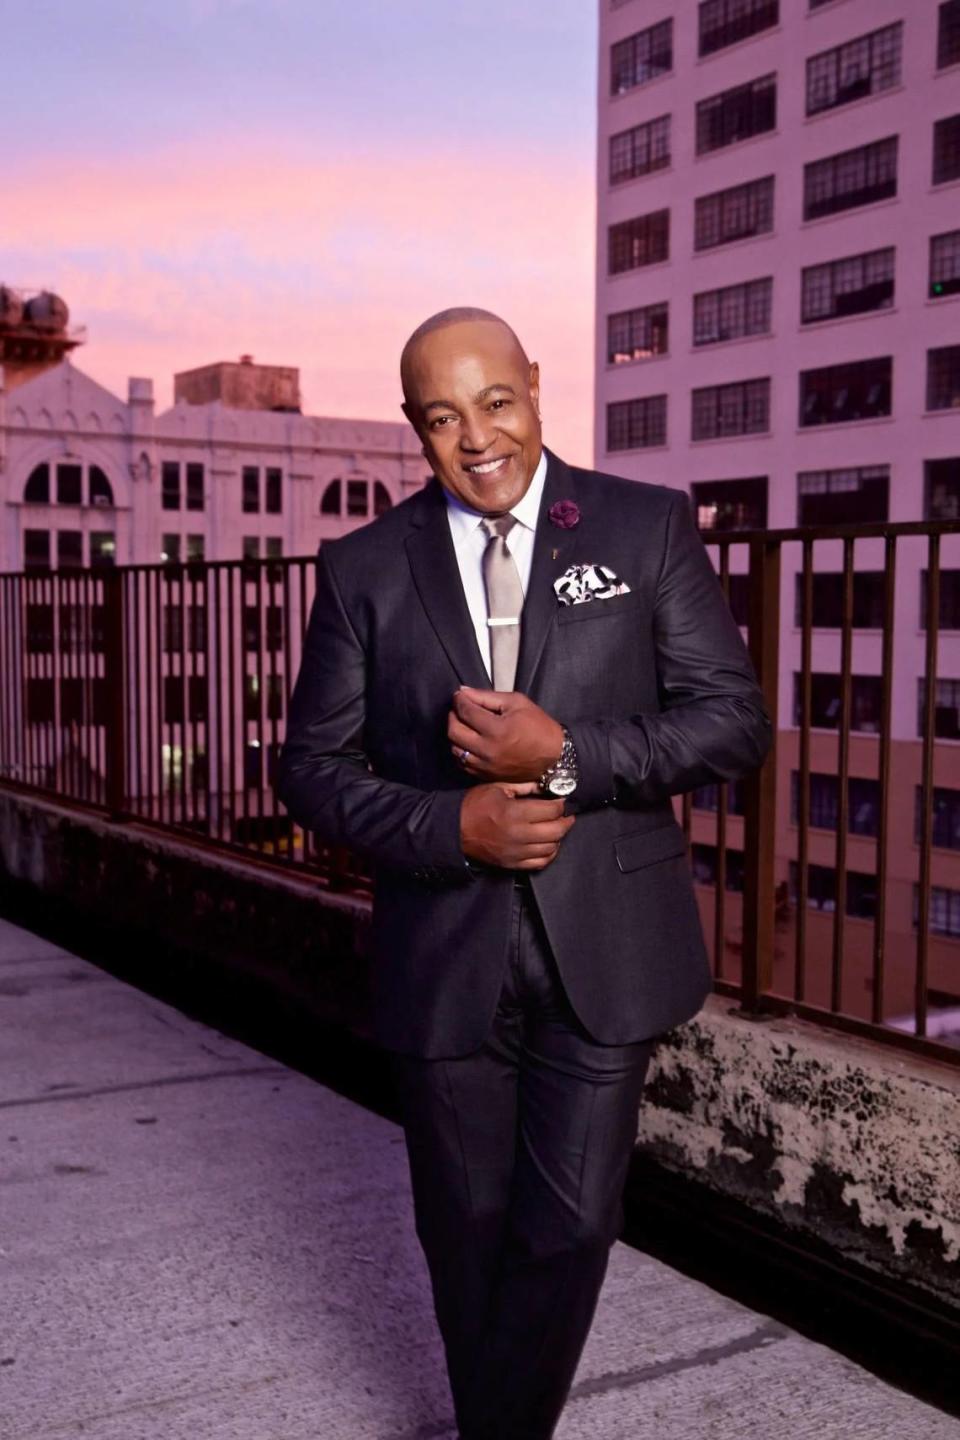 Pop-soul singer Peabo Bryson will be at Lexington Opera House on Jan. 14. Tickets are available.